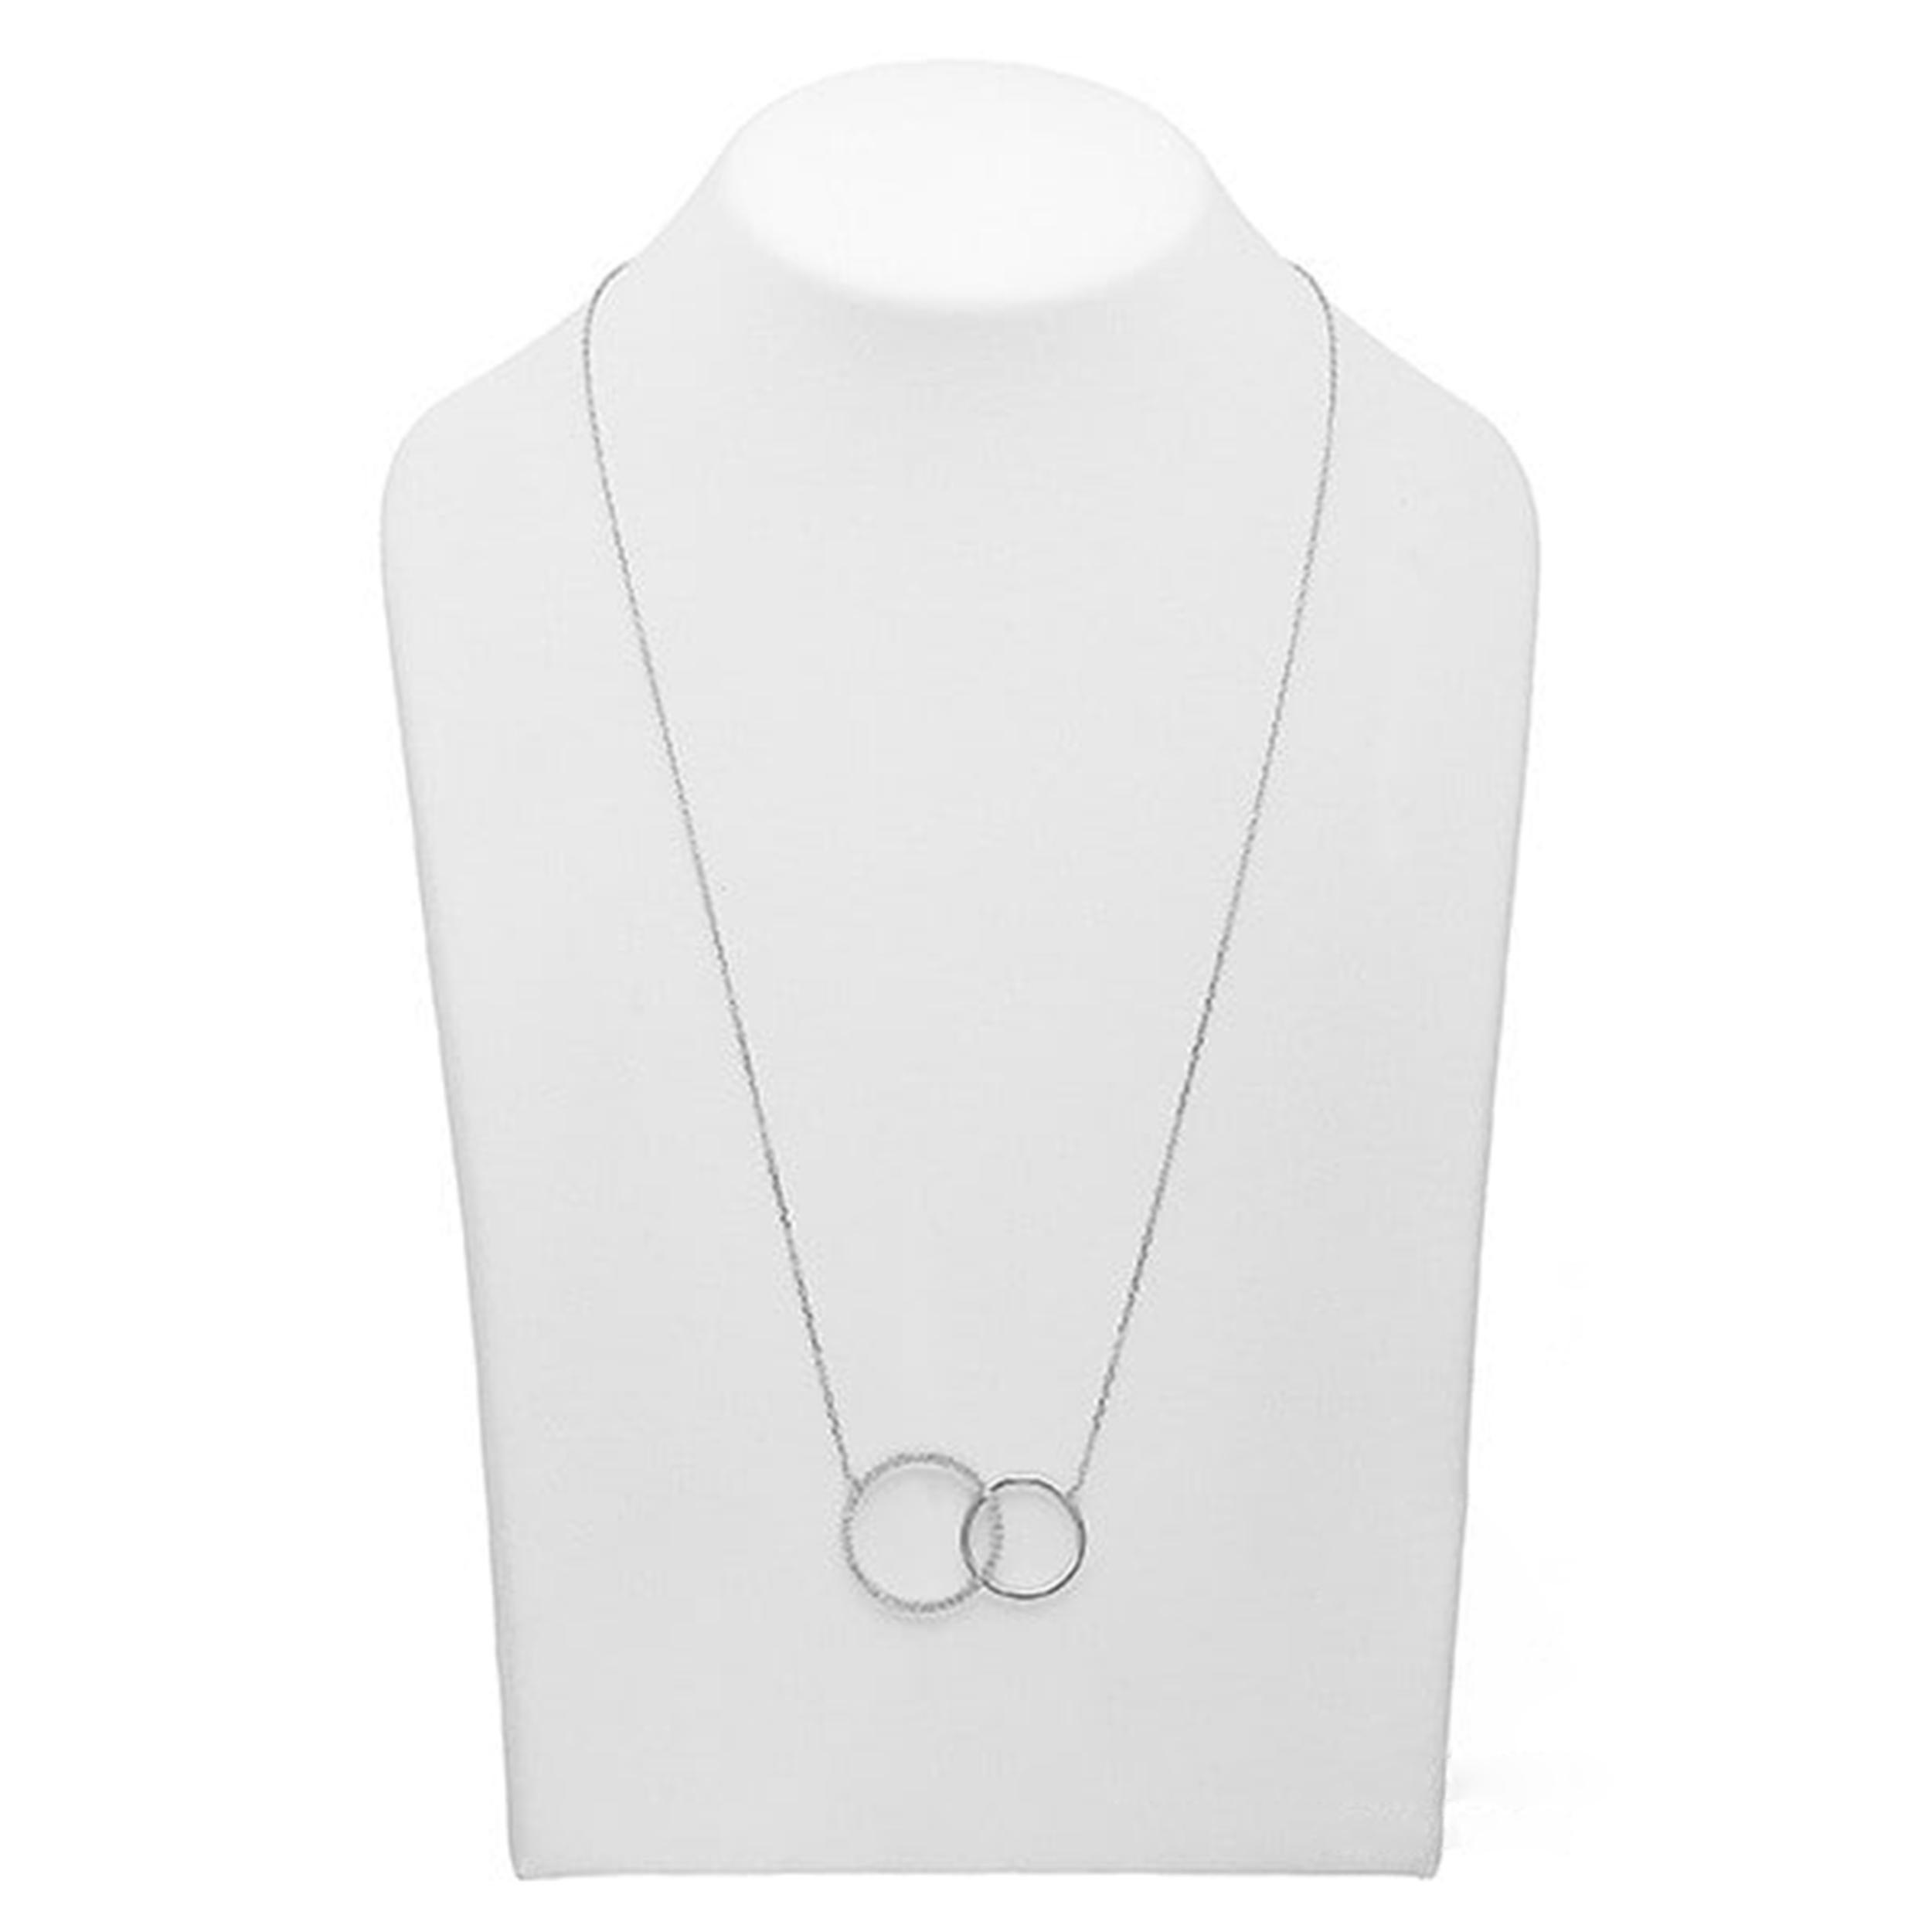 Elevate your style with this exquisite 18K white gold diamond circle pendant necklace. Crafted from luxurious white gold, this pendant features a sleek and timeless circle design adorned with shimmering diamonds, totaling approximately 0.15 carats.